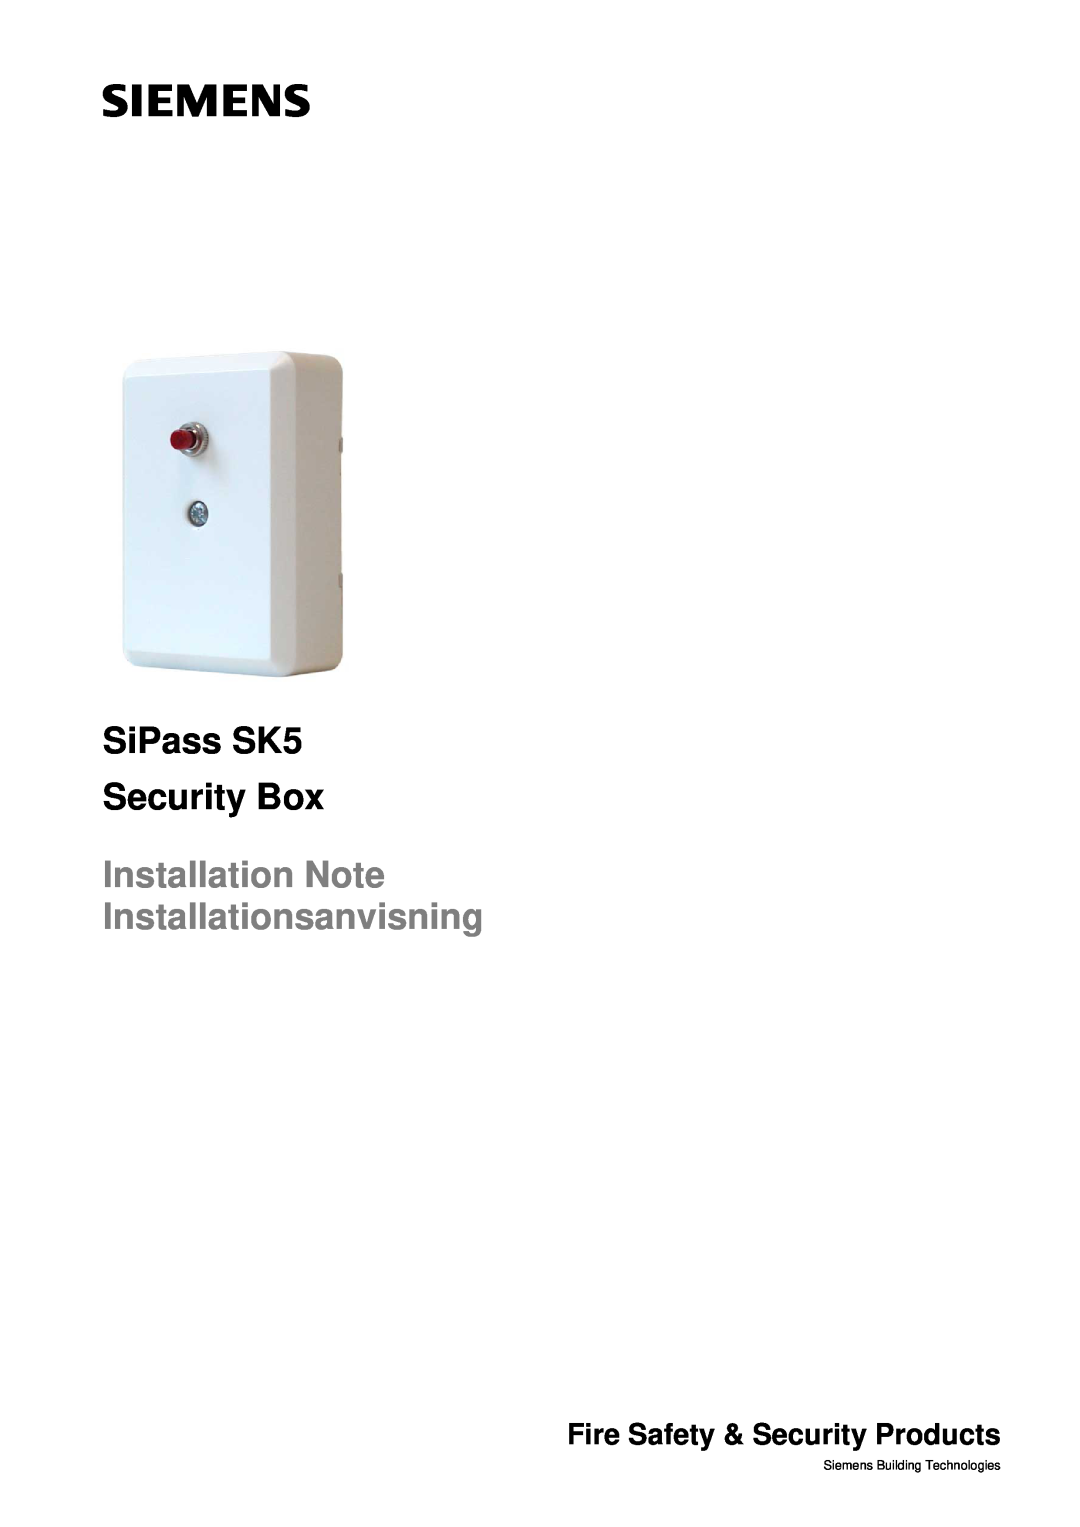 Siemens manual SiPass SK5 Security Box, Installation Note Installationsanvisning, Fire Safety & Security Products 